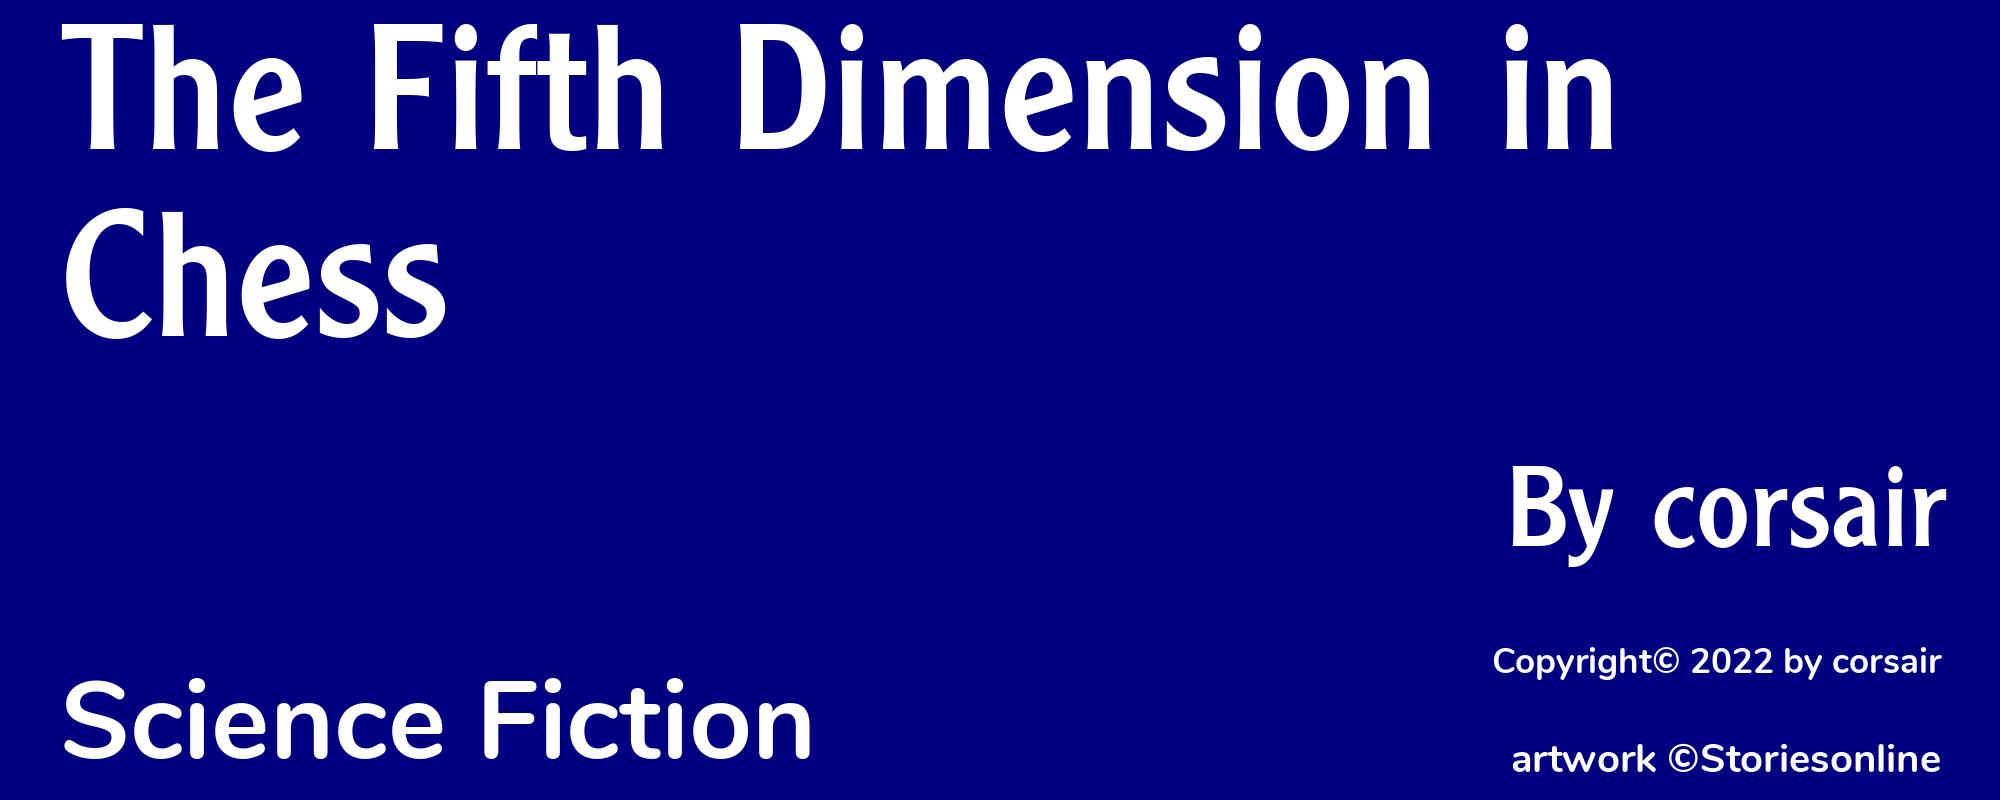 The Fifth Dimension in Chess - Cover